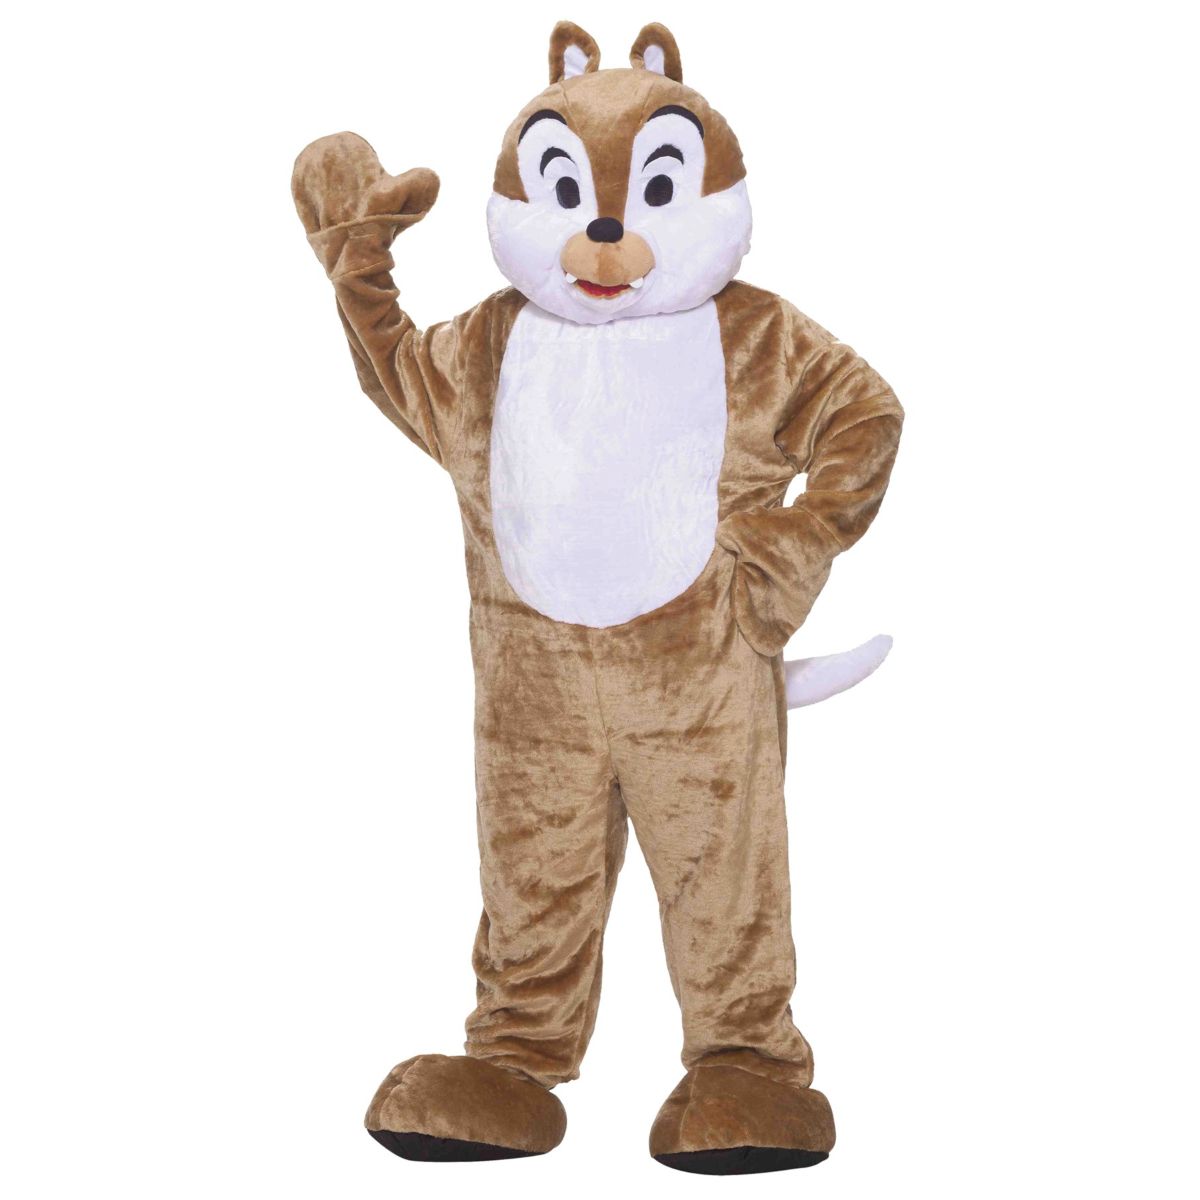 The Costume Center Brown and White Chipmunk Mascot Unisex Child Halloween Costume - One Size